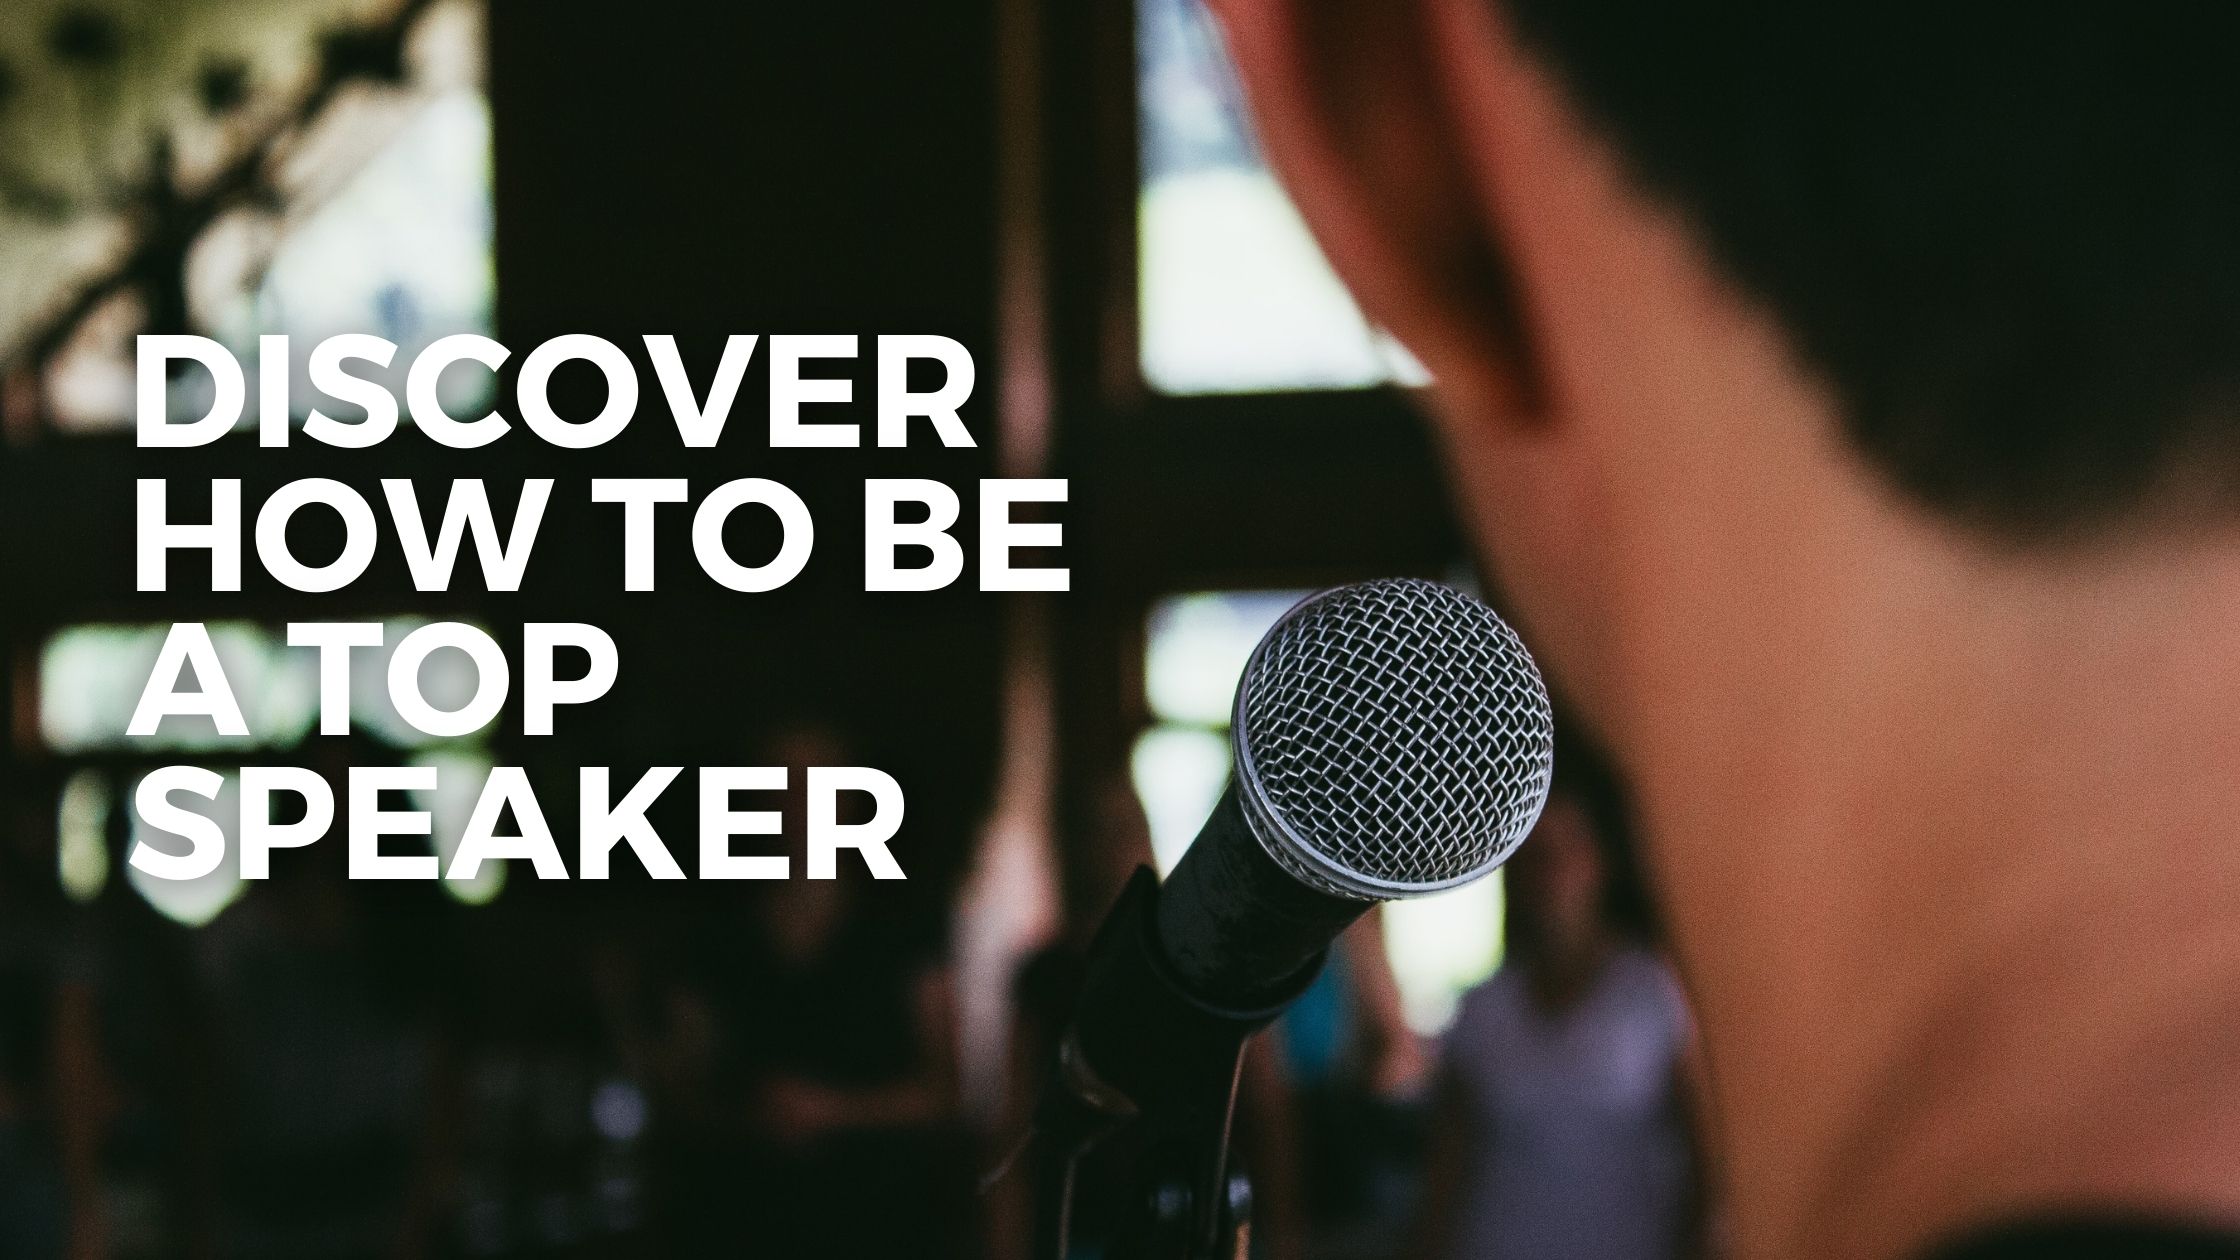 Discover how to be a top speaker